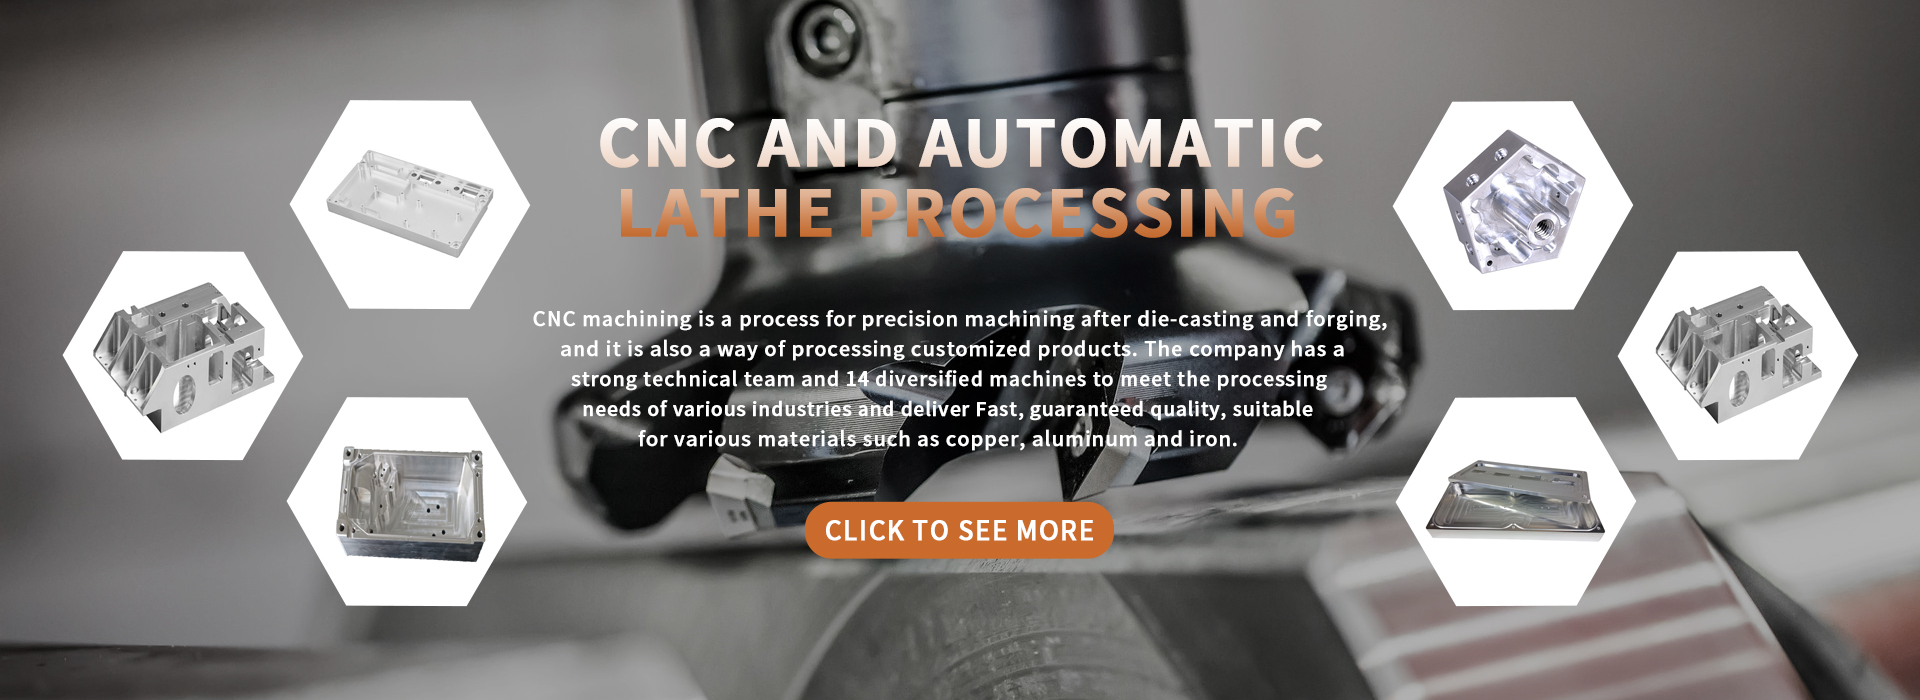 CNC and automatic lathe processing